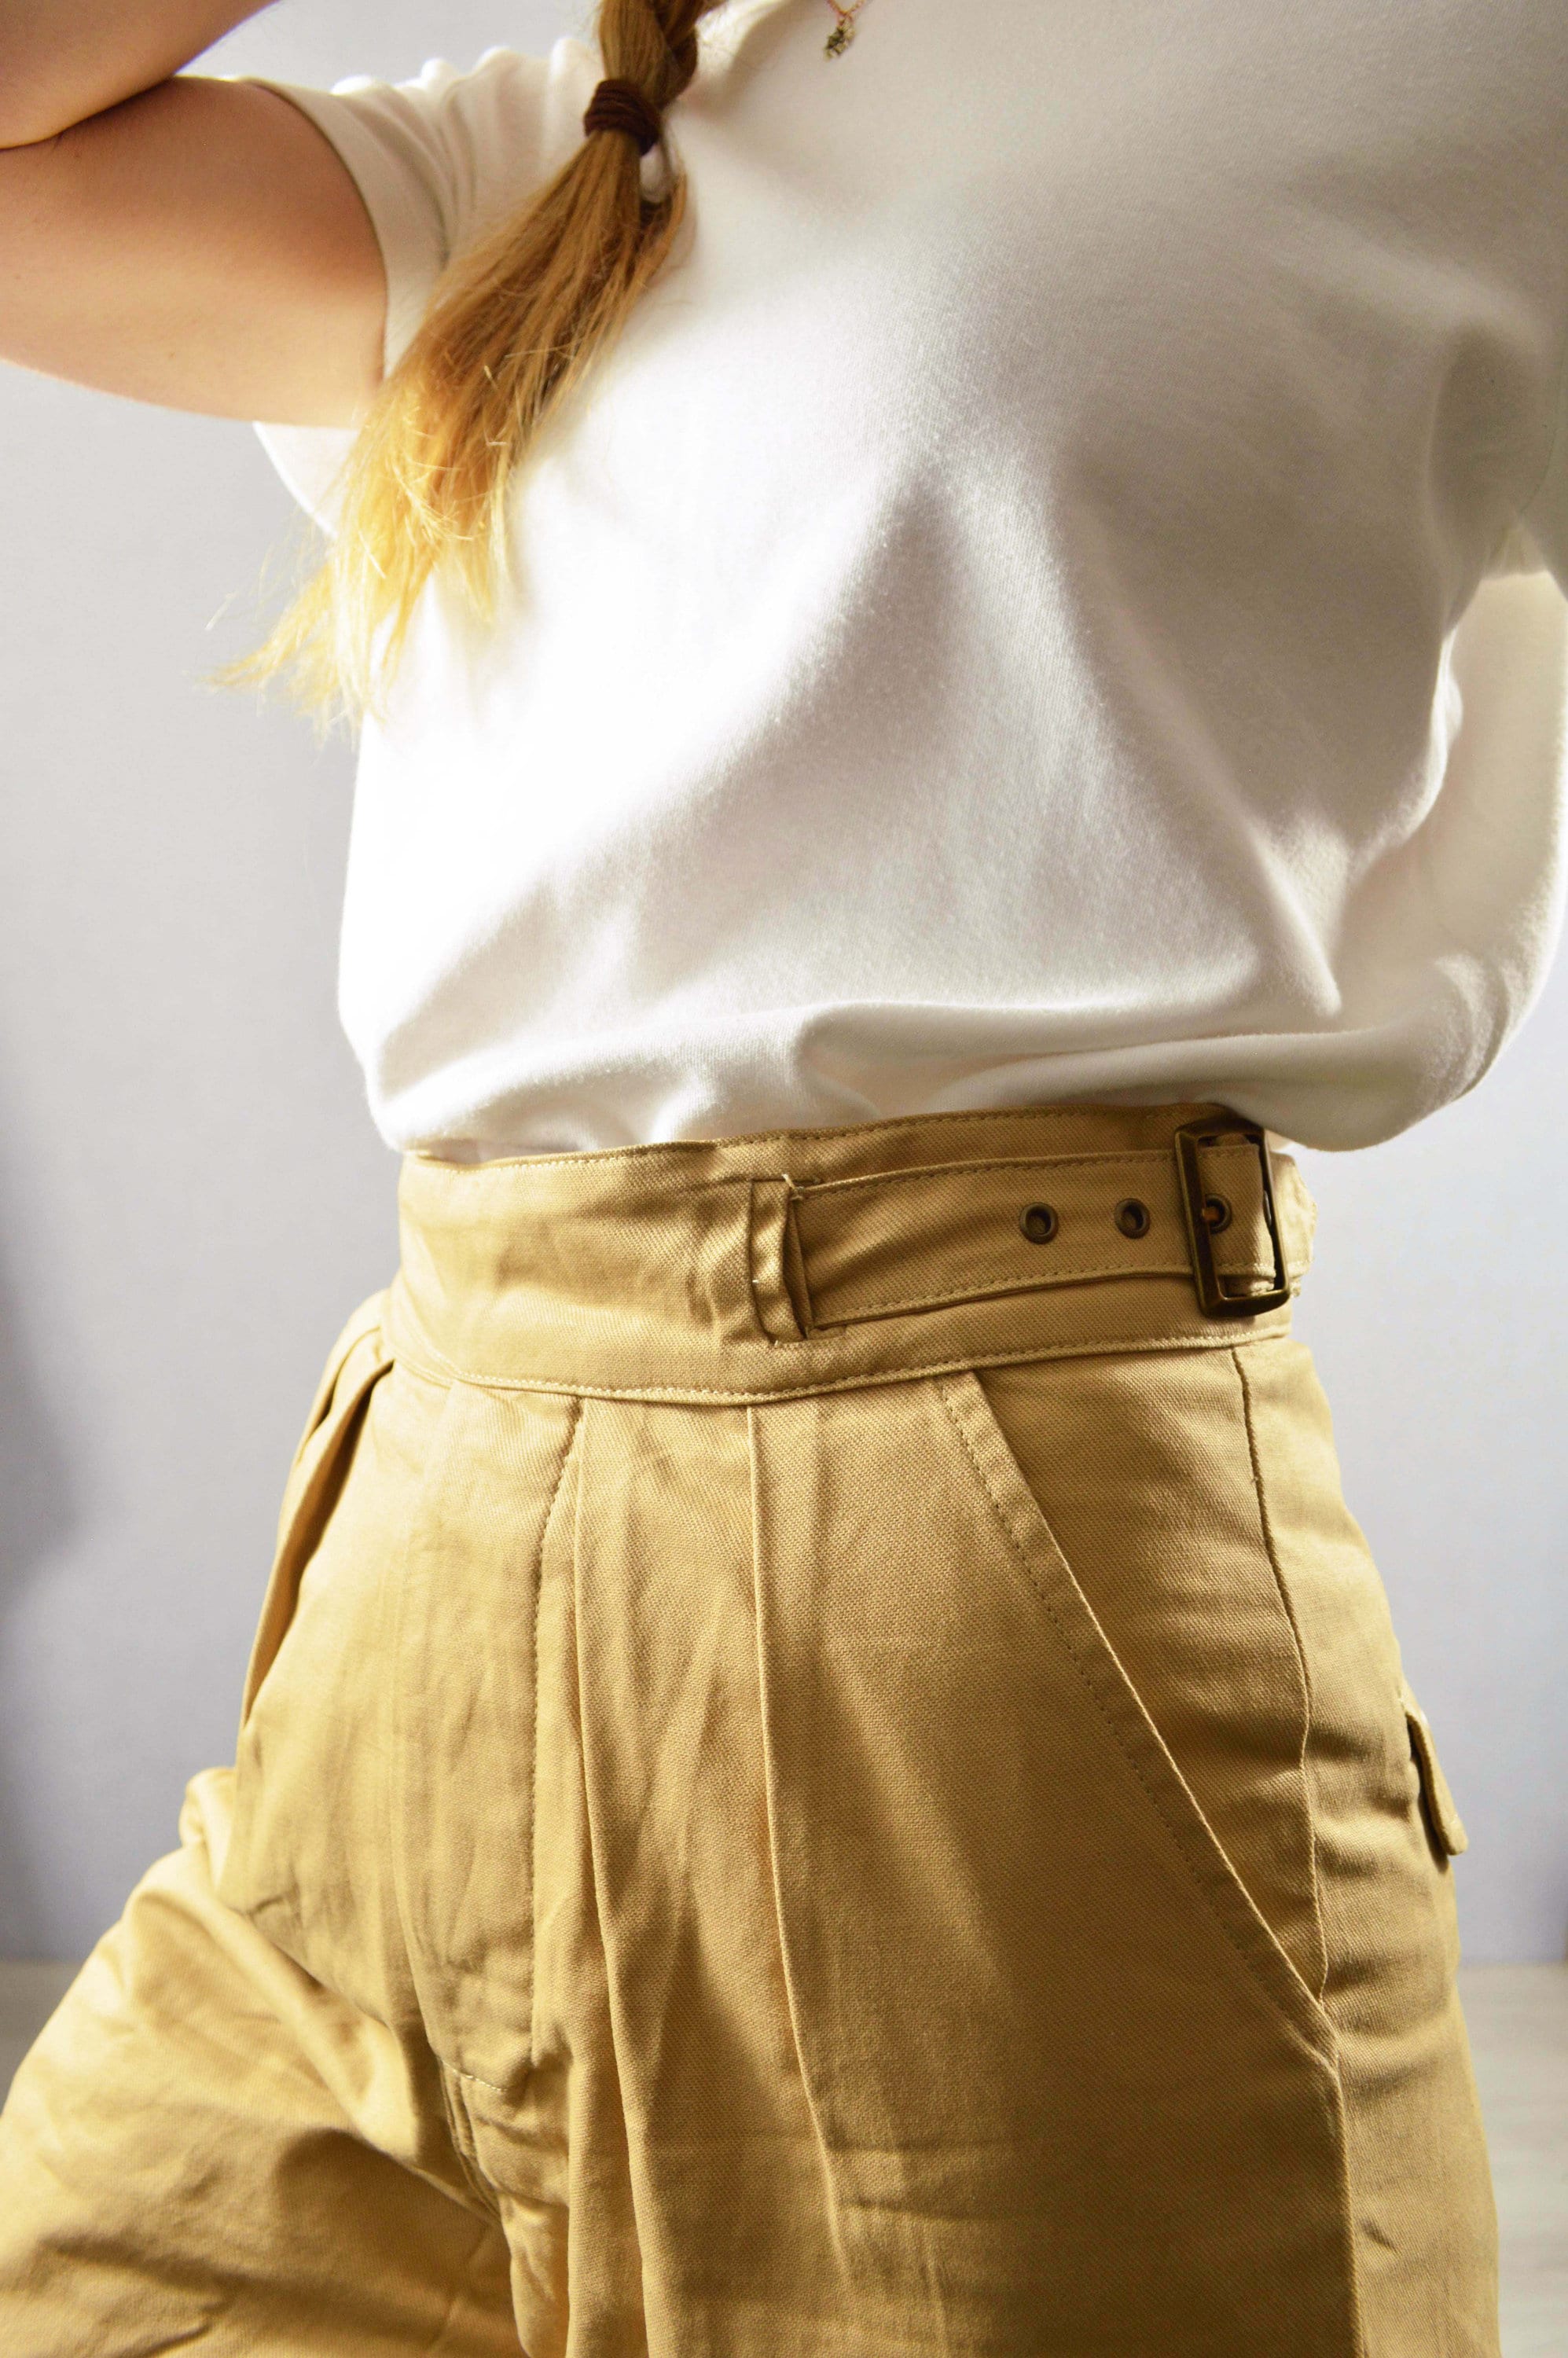 Unisex High Waisted Gurkha Pants 100% Cotton 1950s Army Style Trousers  Buckle Adjustable Tan Beige / Army Green / Navy Ink Blue -  Israel